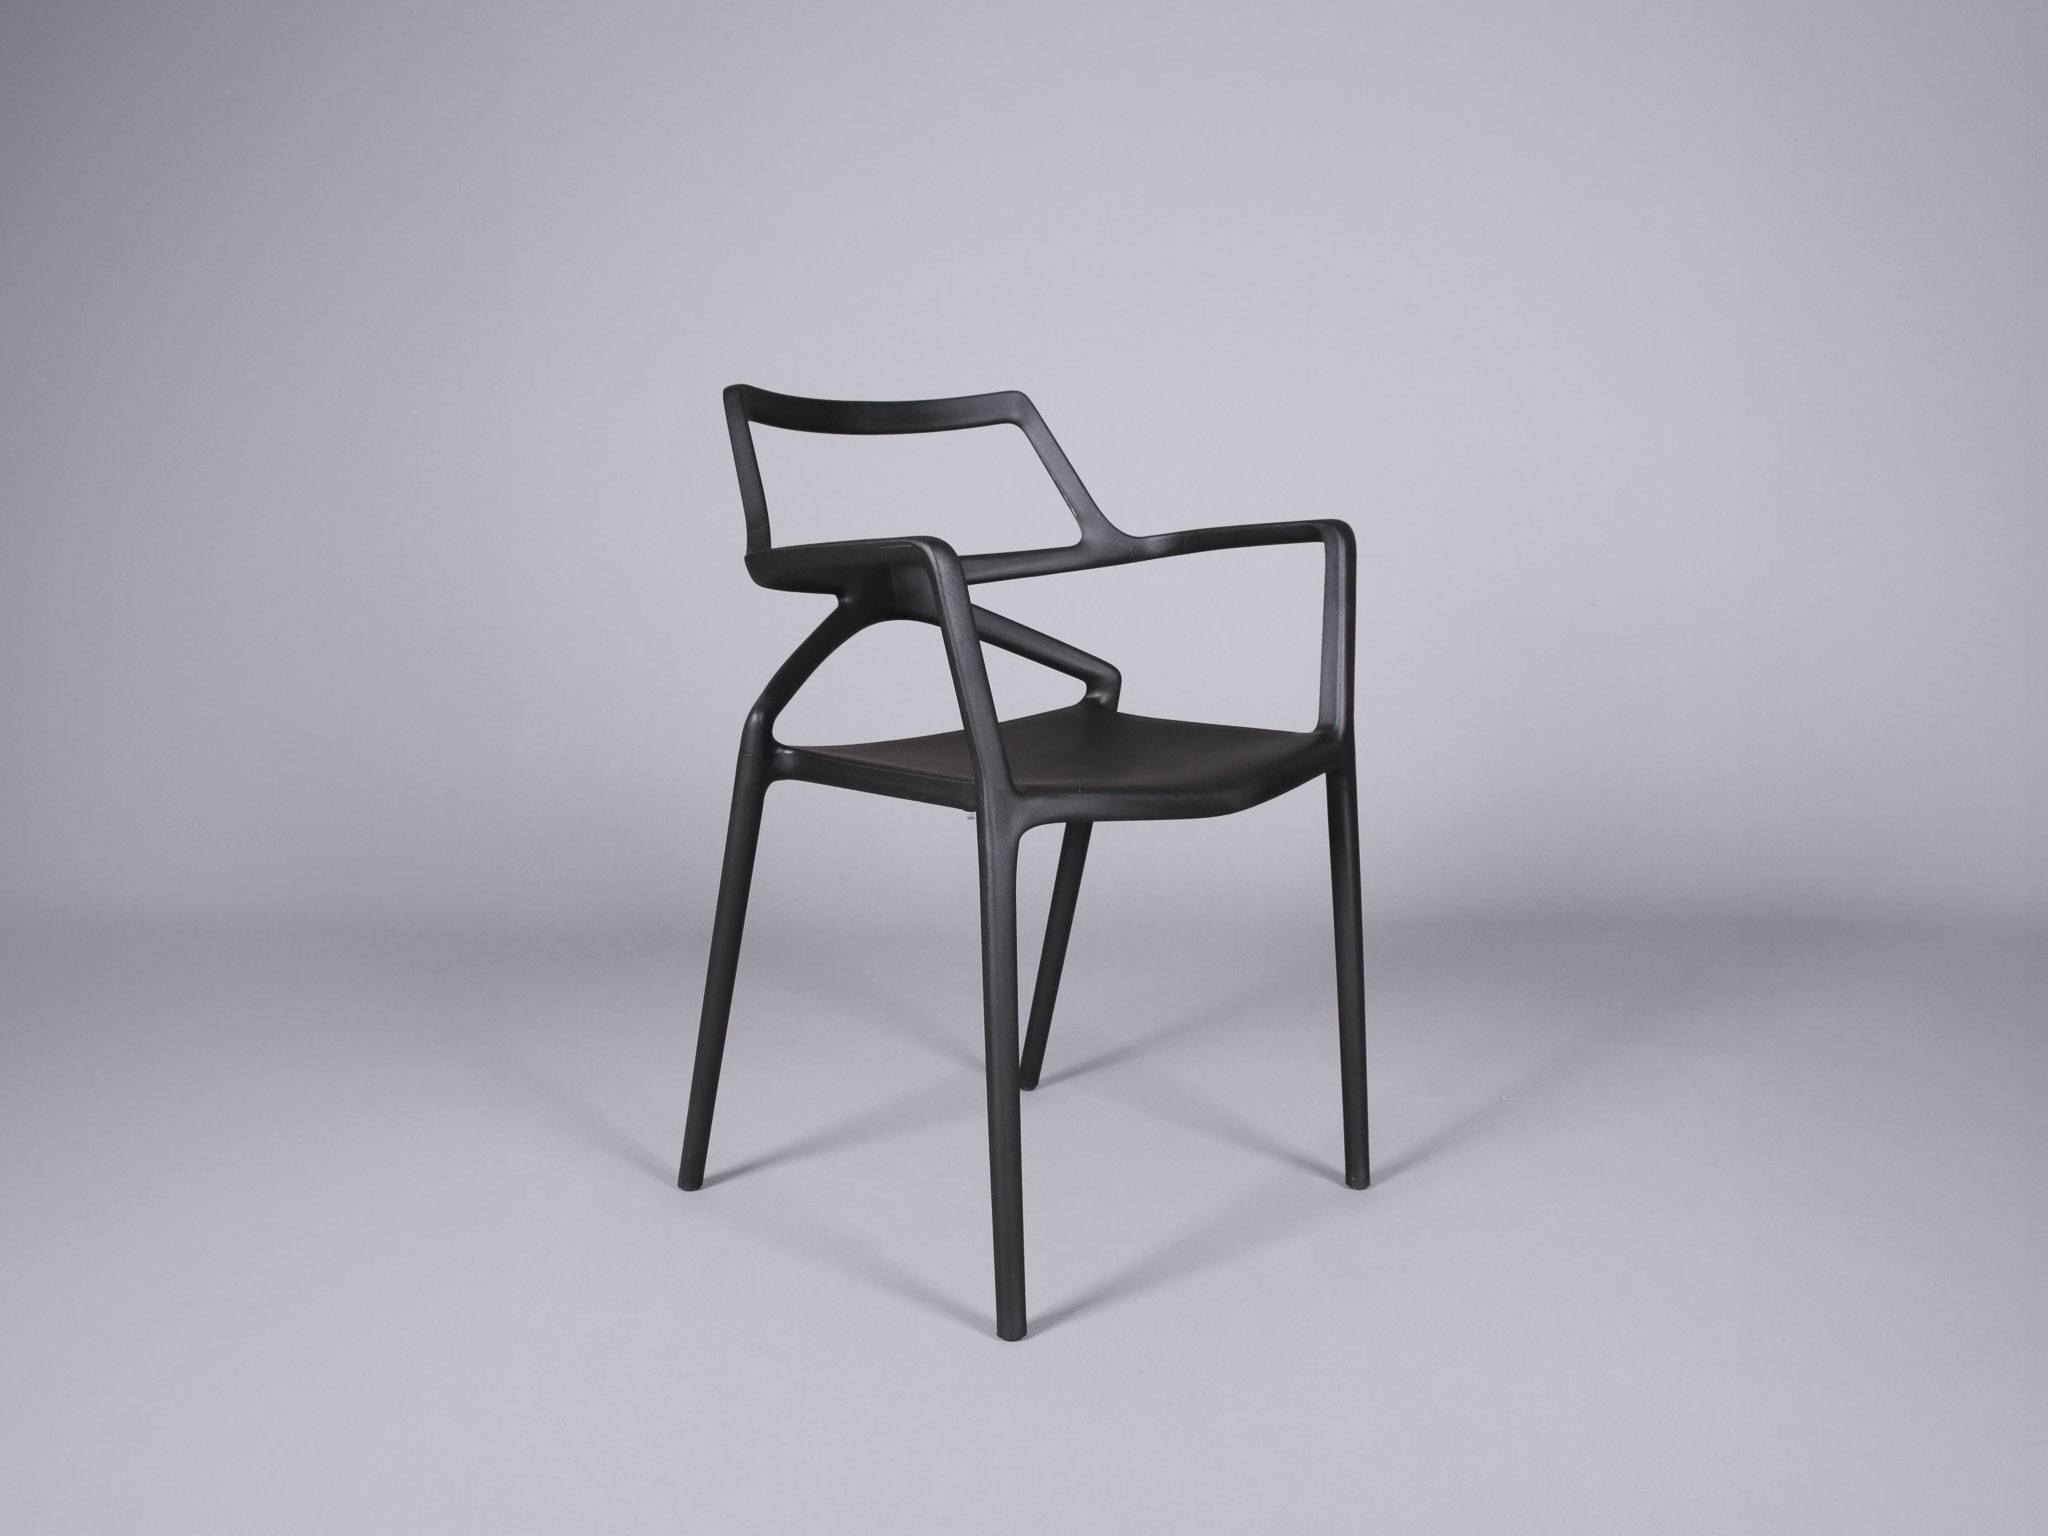 The Lisbon chair is perfect for any occasion, from product launches to corporate events and trade shows.